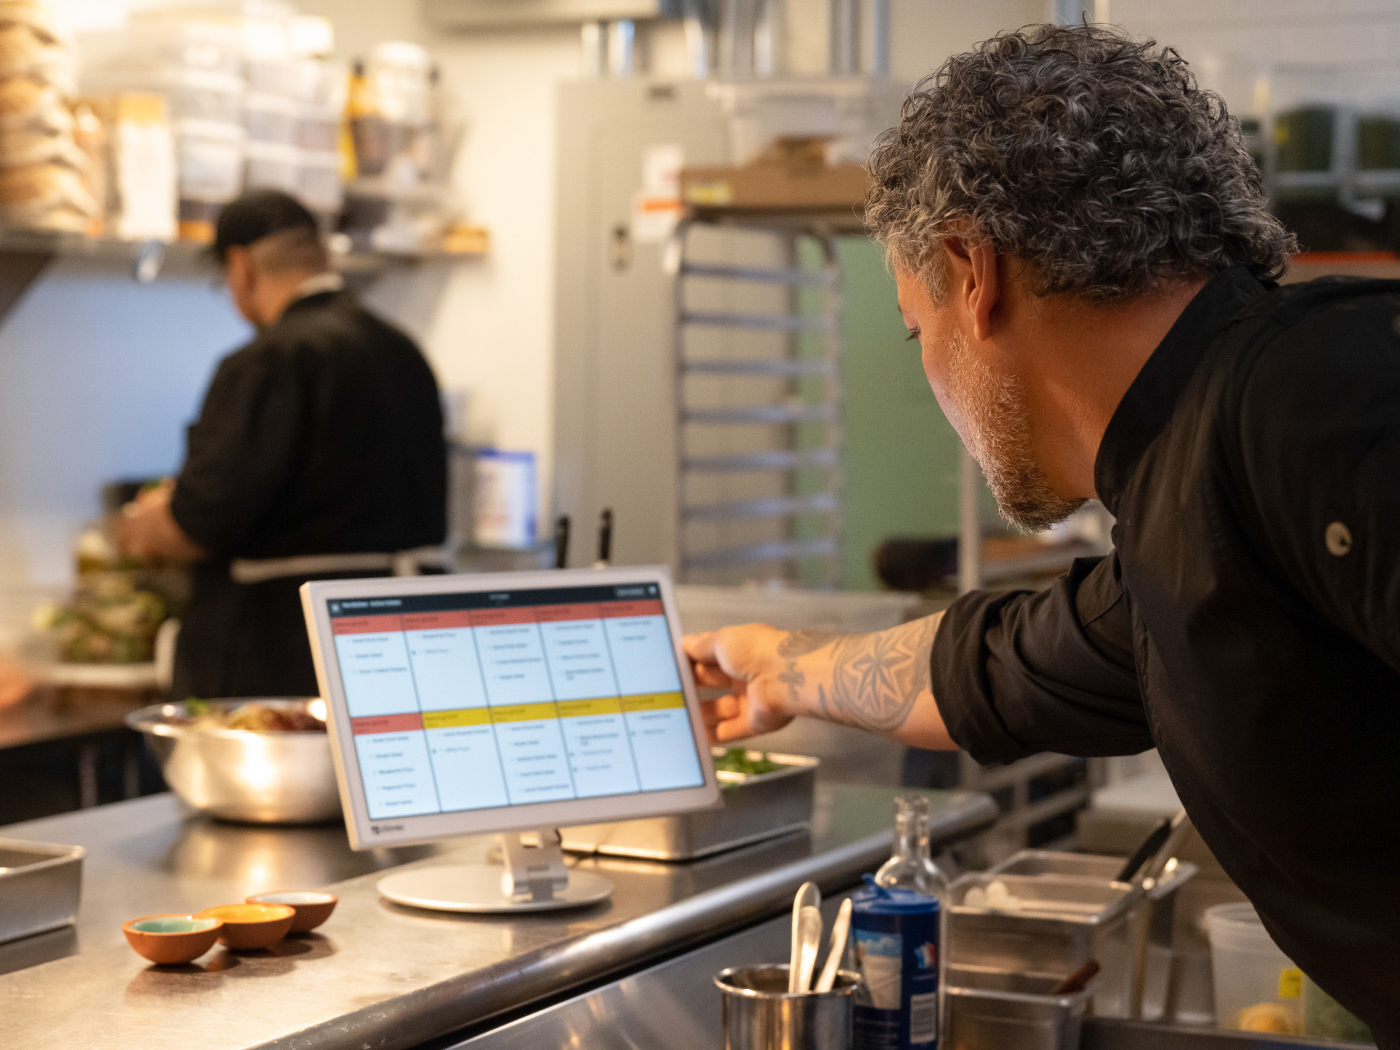 Chef holding bezel of kitchen display system while looking at orders.